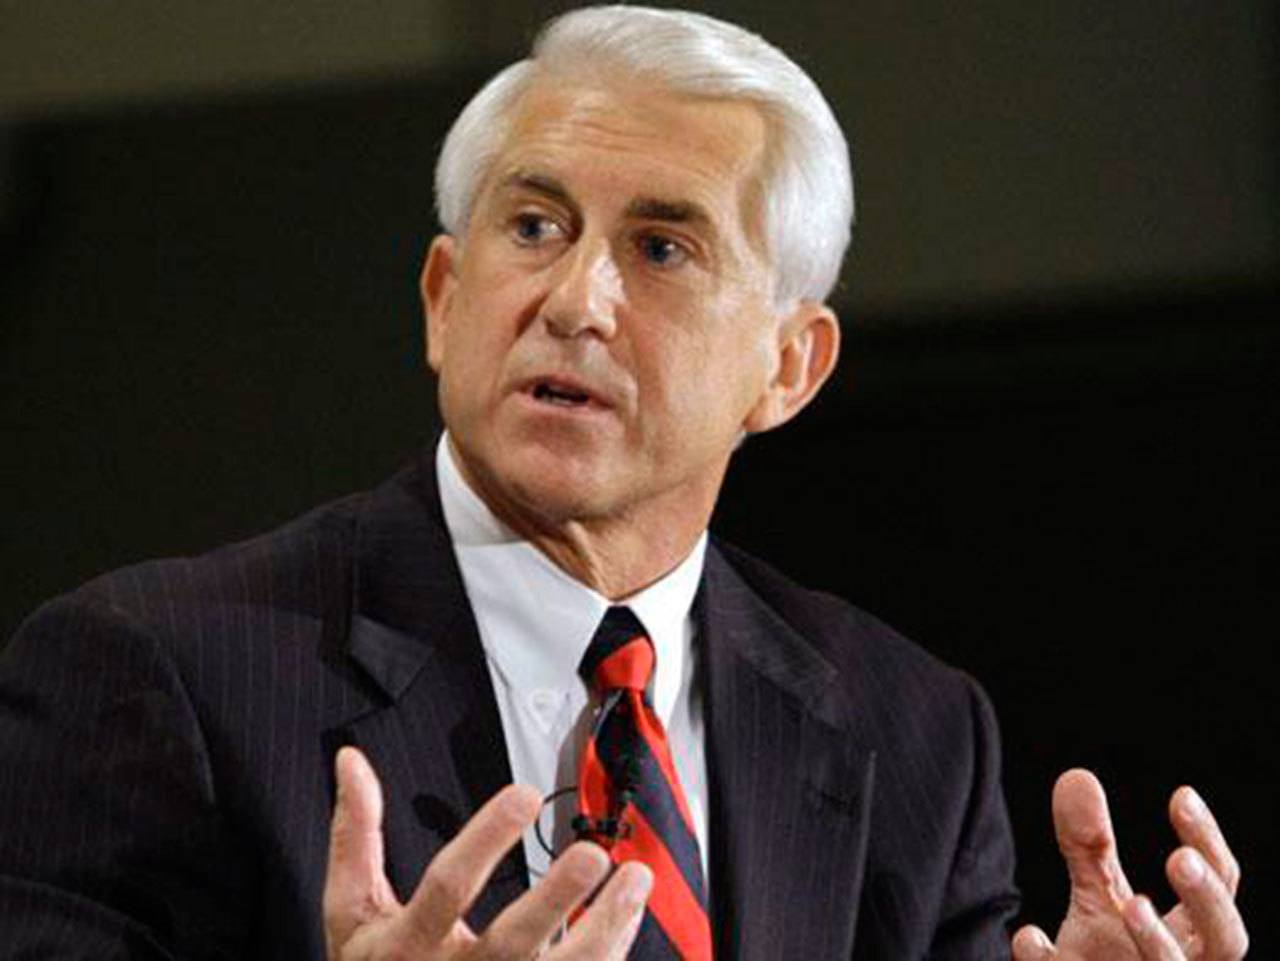 Reichert responds to President Trump’s executive action to withdraw from Trans-Pacific Partnership